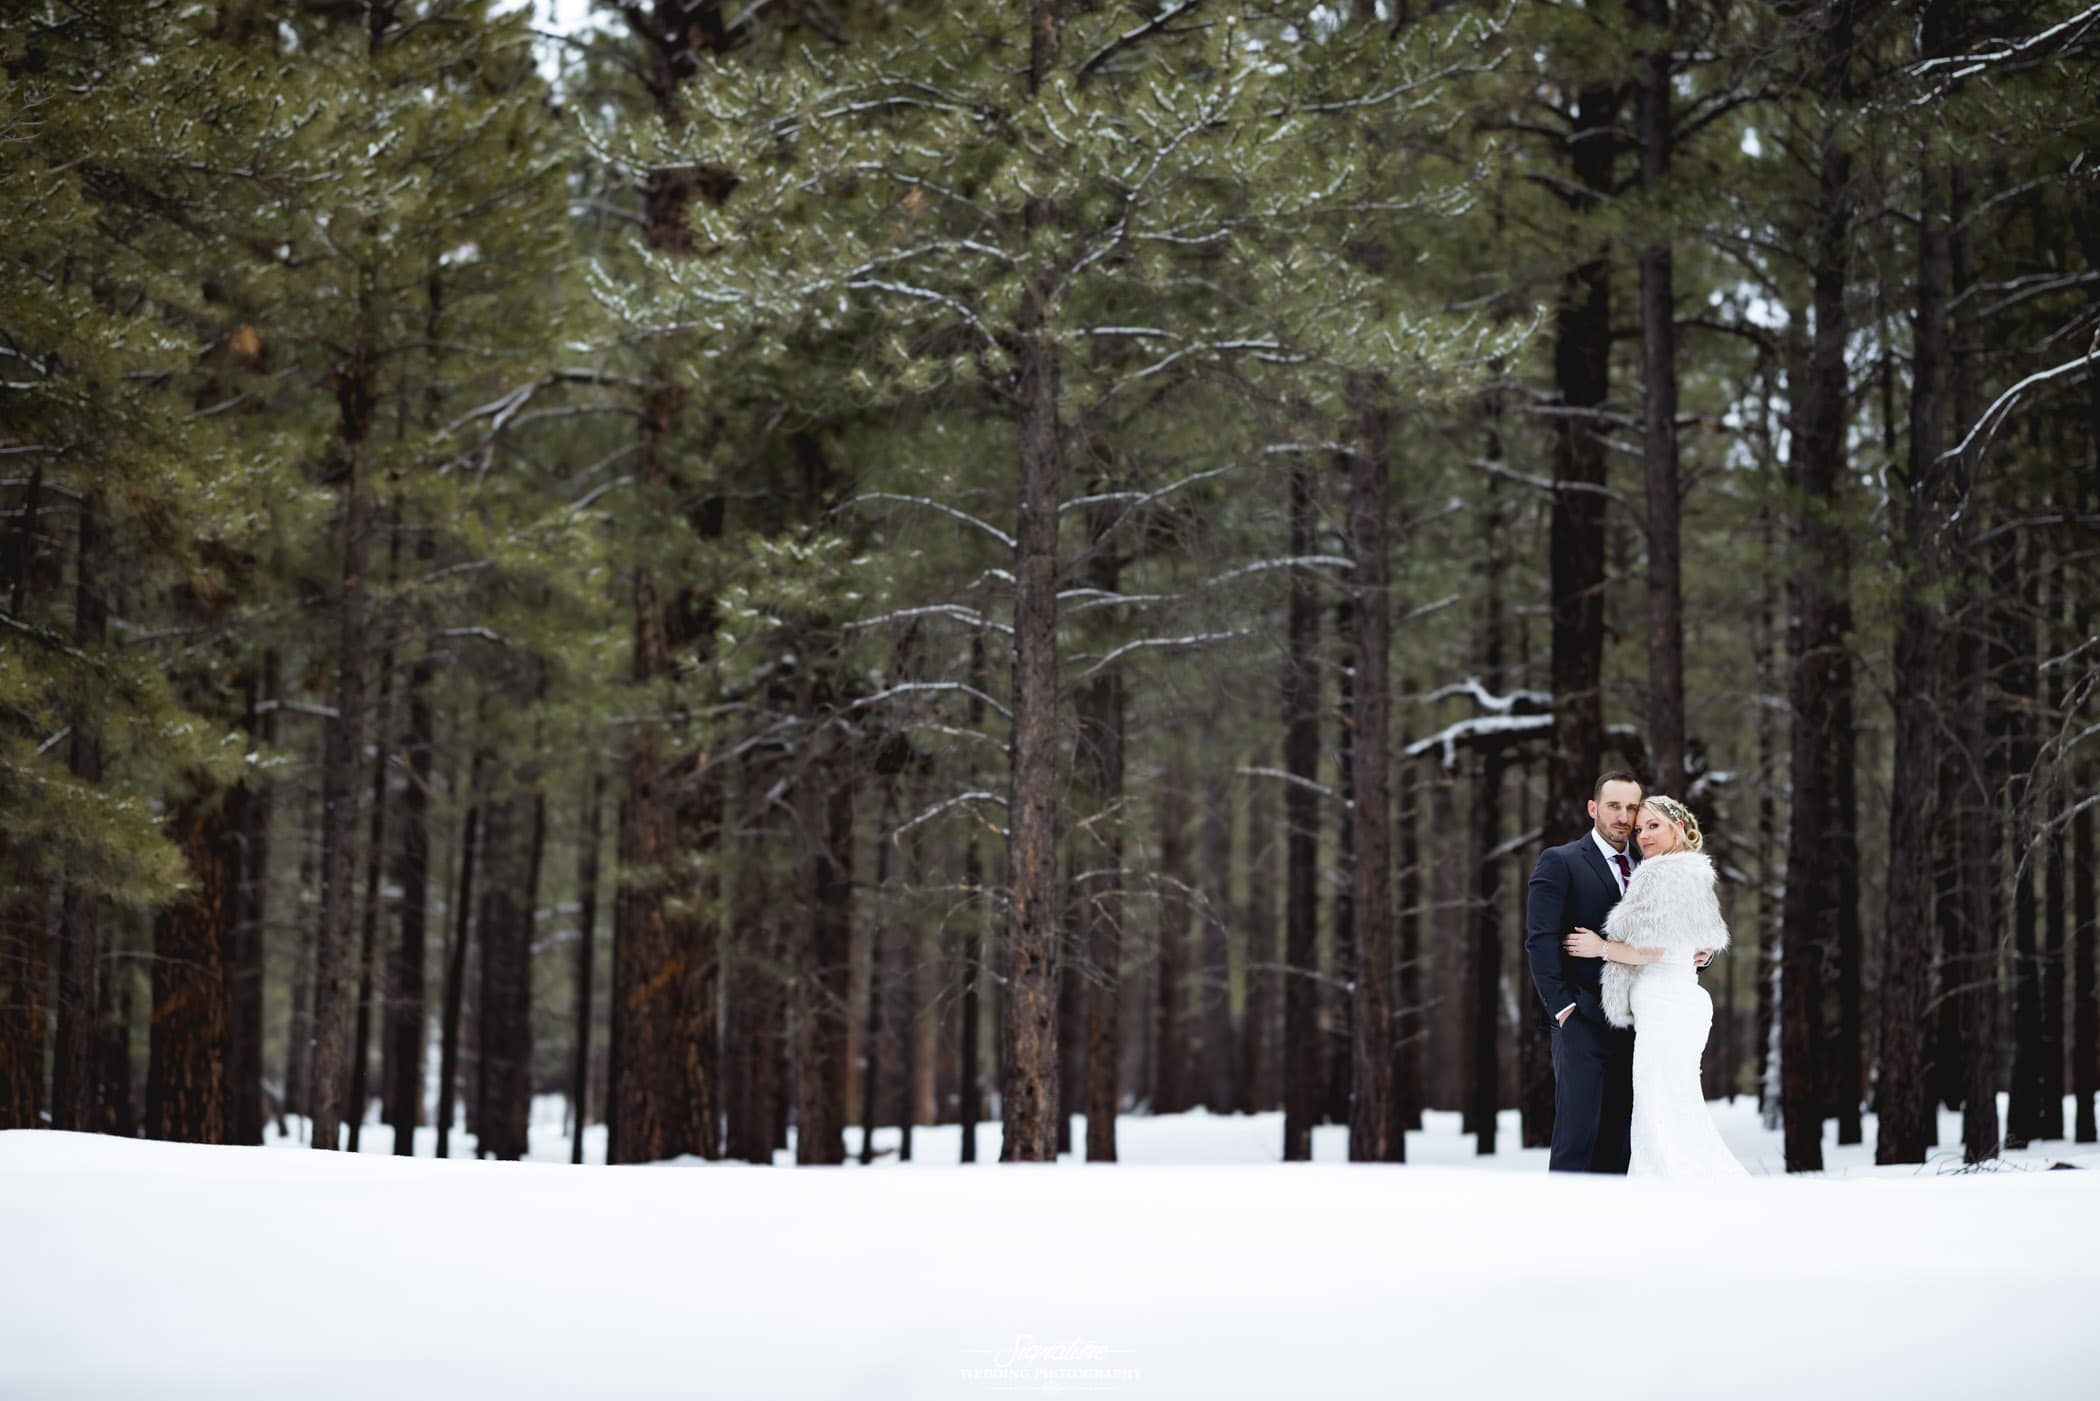 Bride and groom posed in front of winter forest